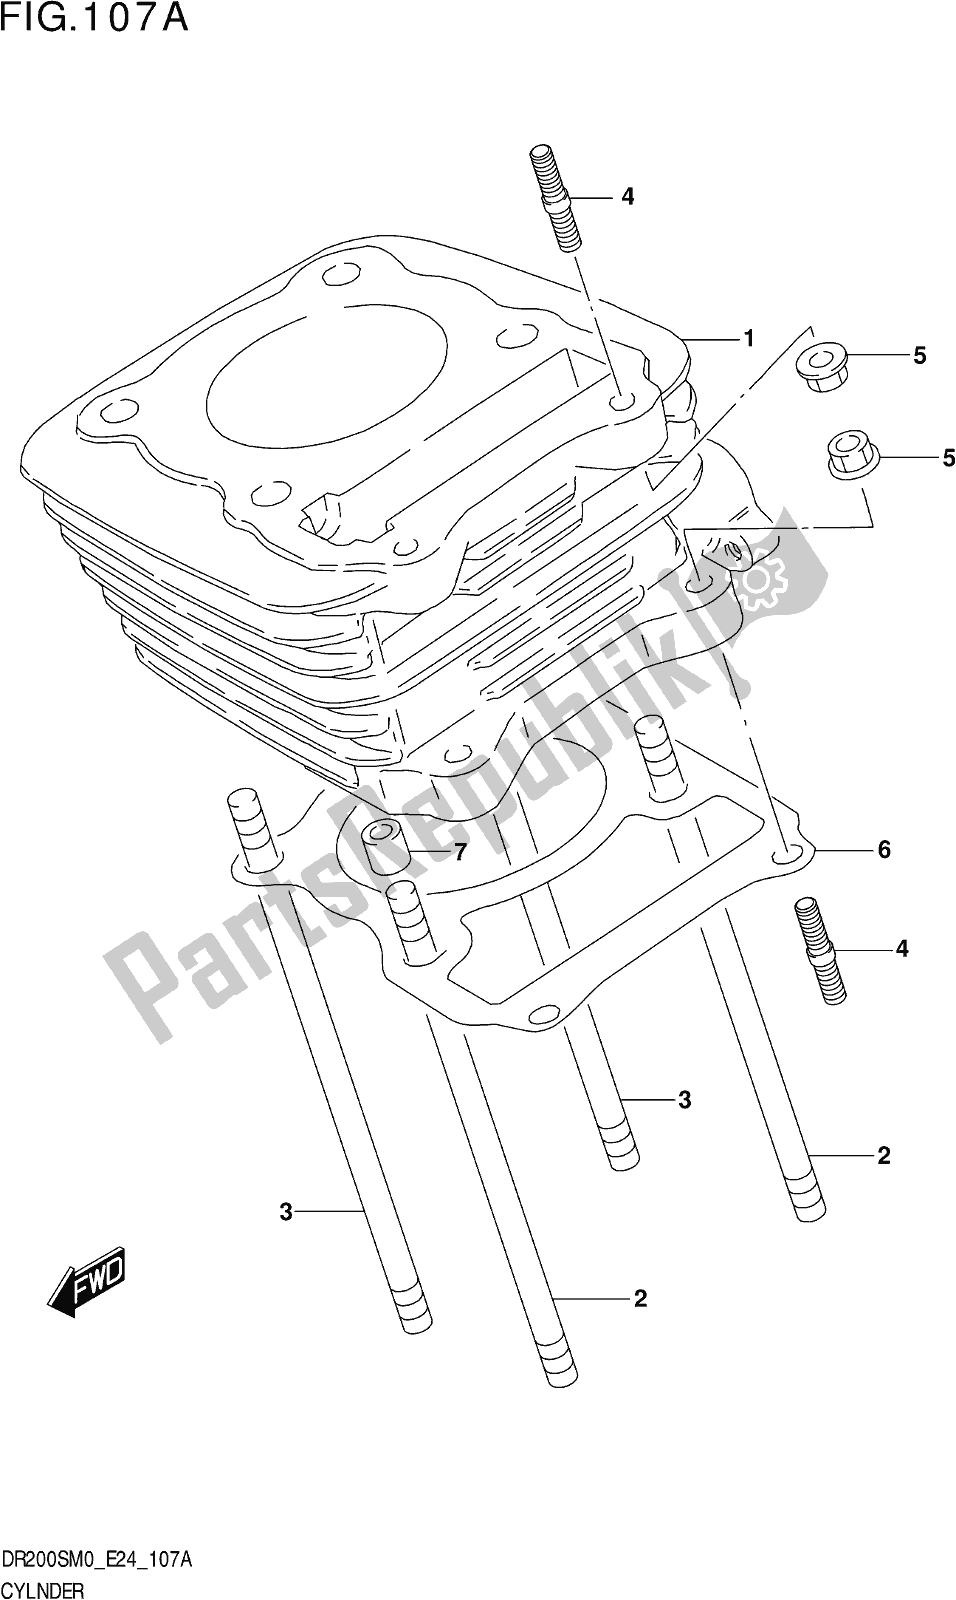 All parts for the Fig. 107a Cylinder of the Suzuki DR 200S 2020